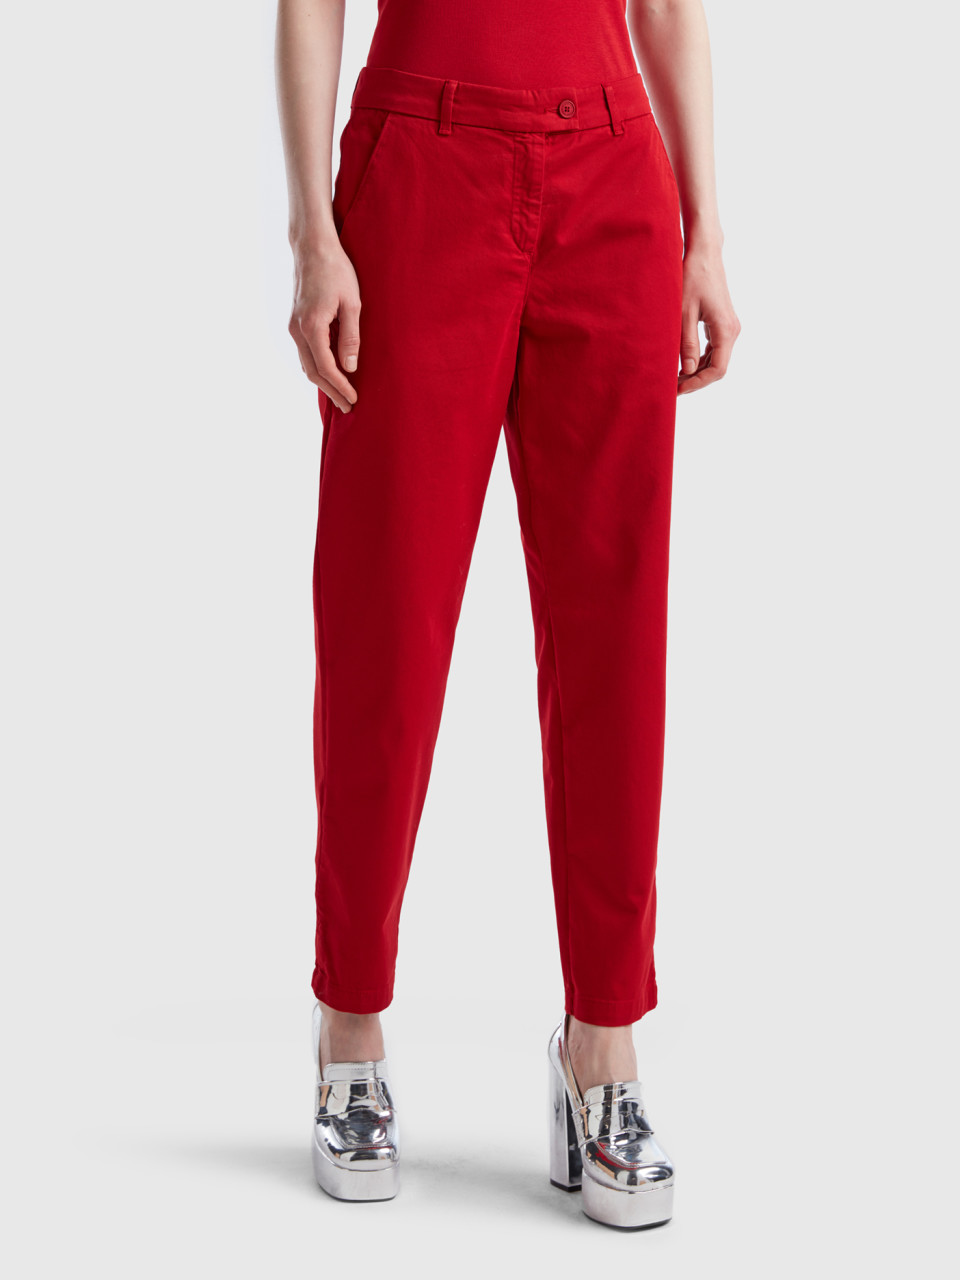 Benetton, Stretch Cotton Chino Trousers, Red, Women